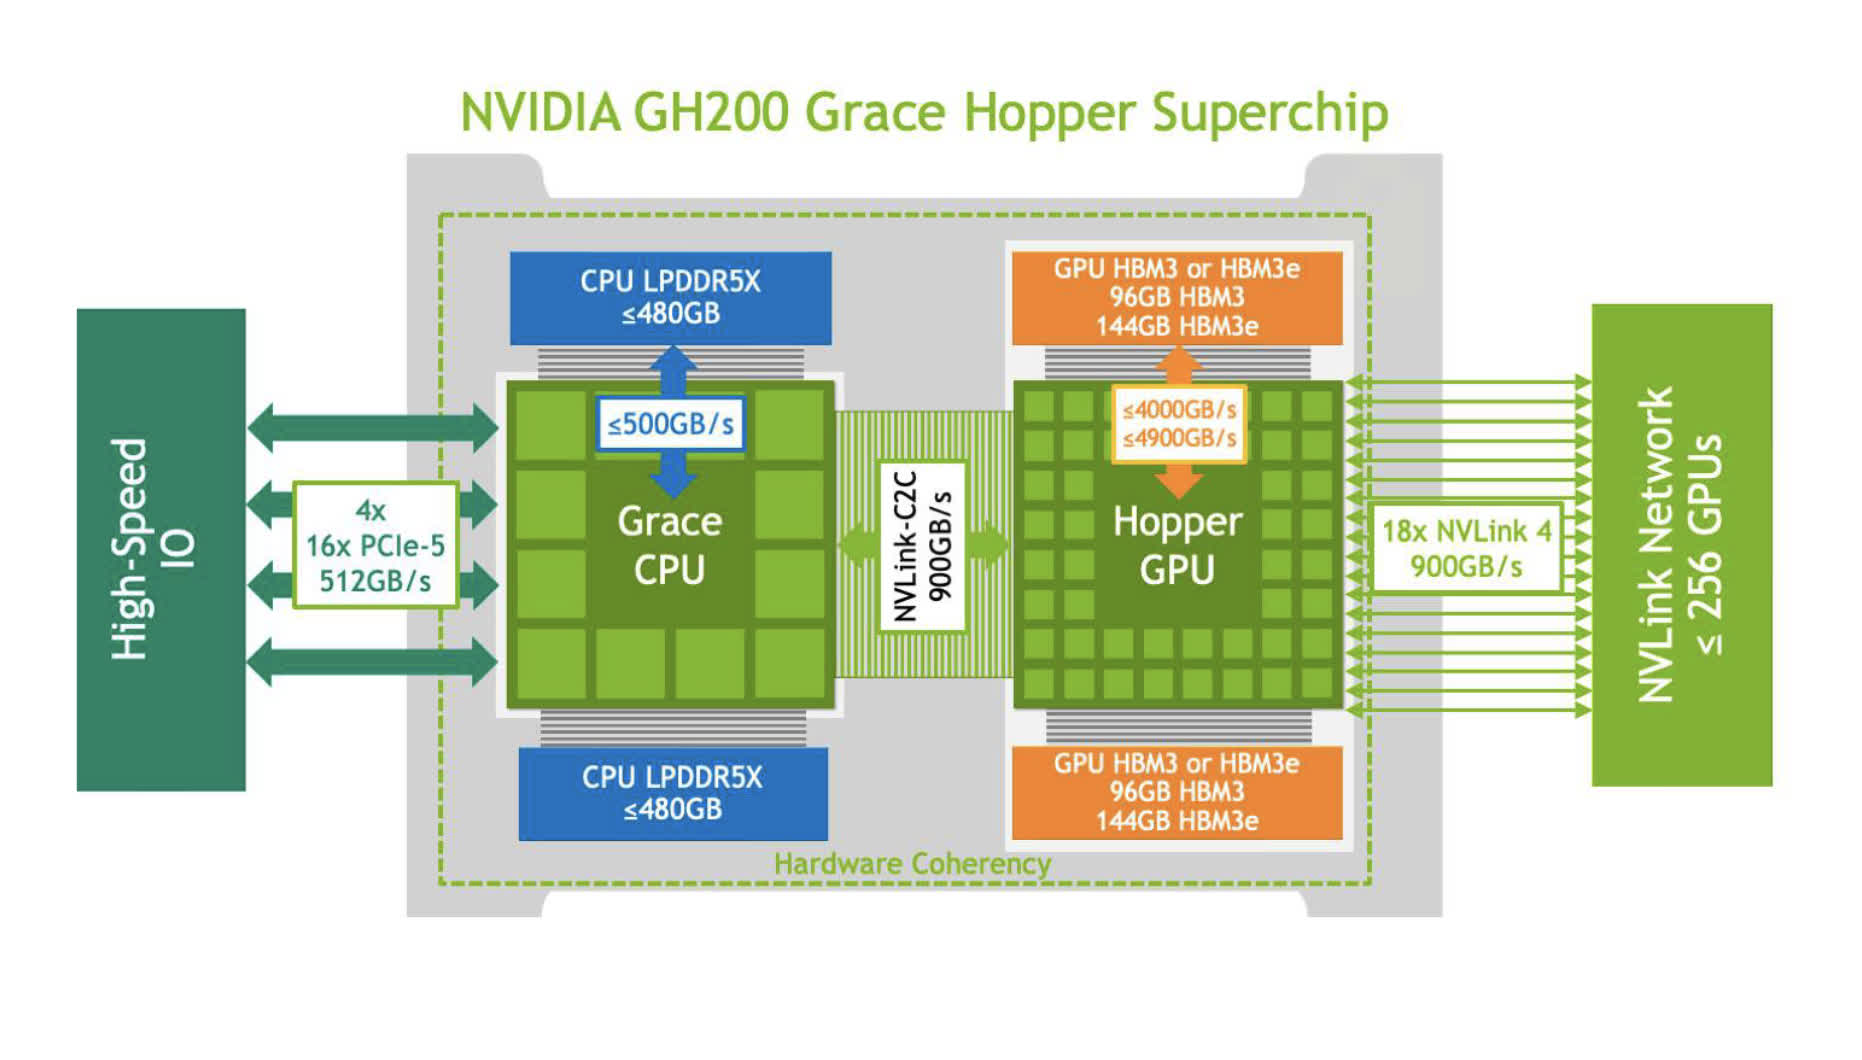 Nvidia’s Grace Hopper GH200 superchip benchmarked, holds up well against AMD and Intel competition